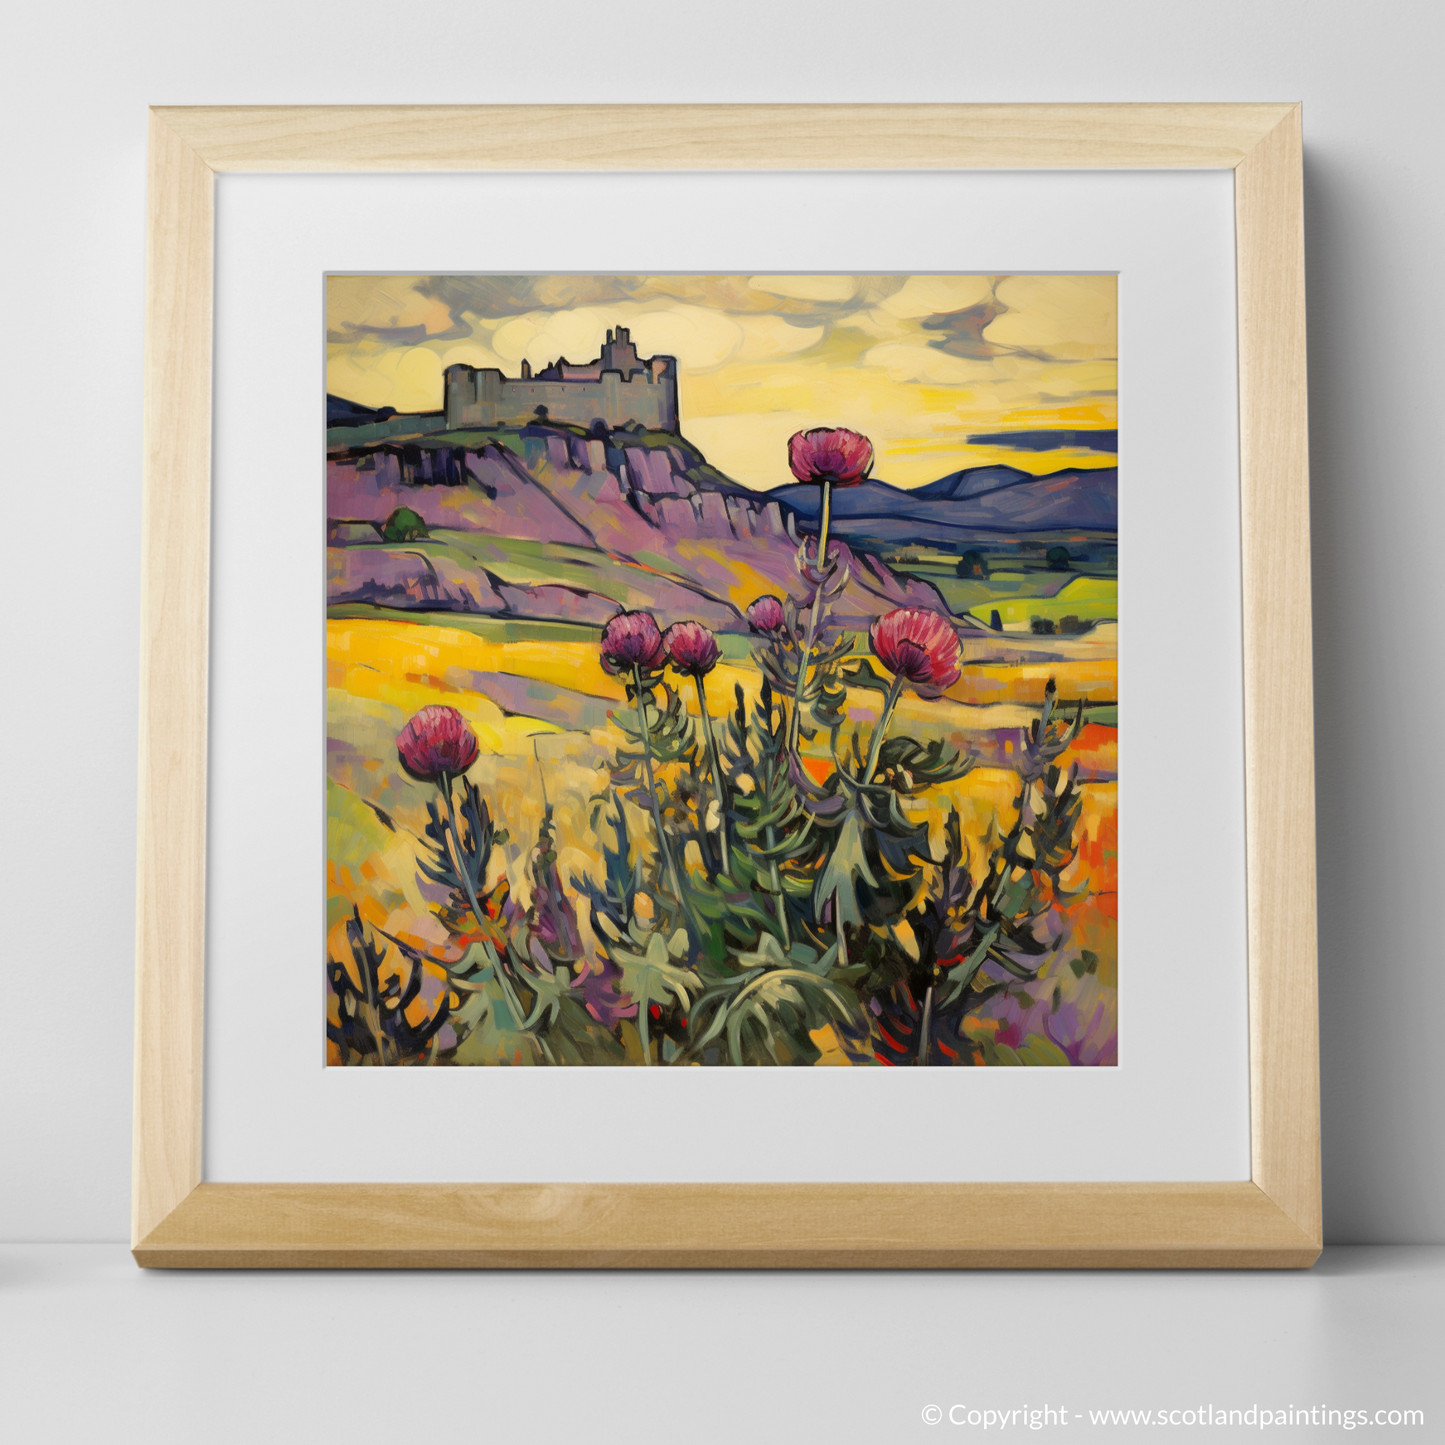 Thistle in the Highlands: A Fauvist Ode to Scottish Resilience